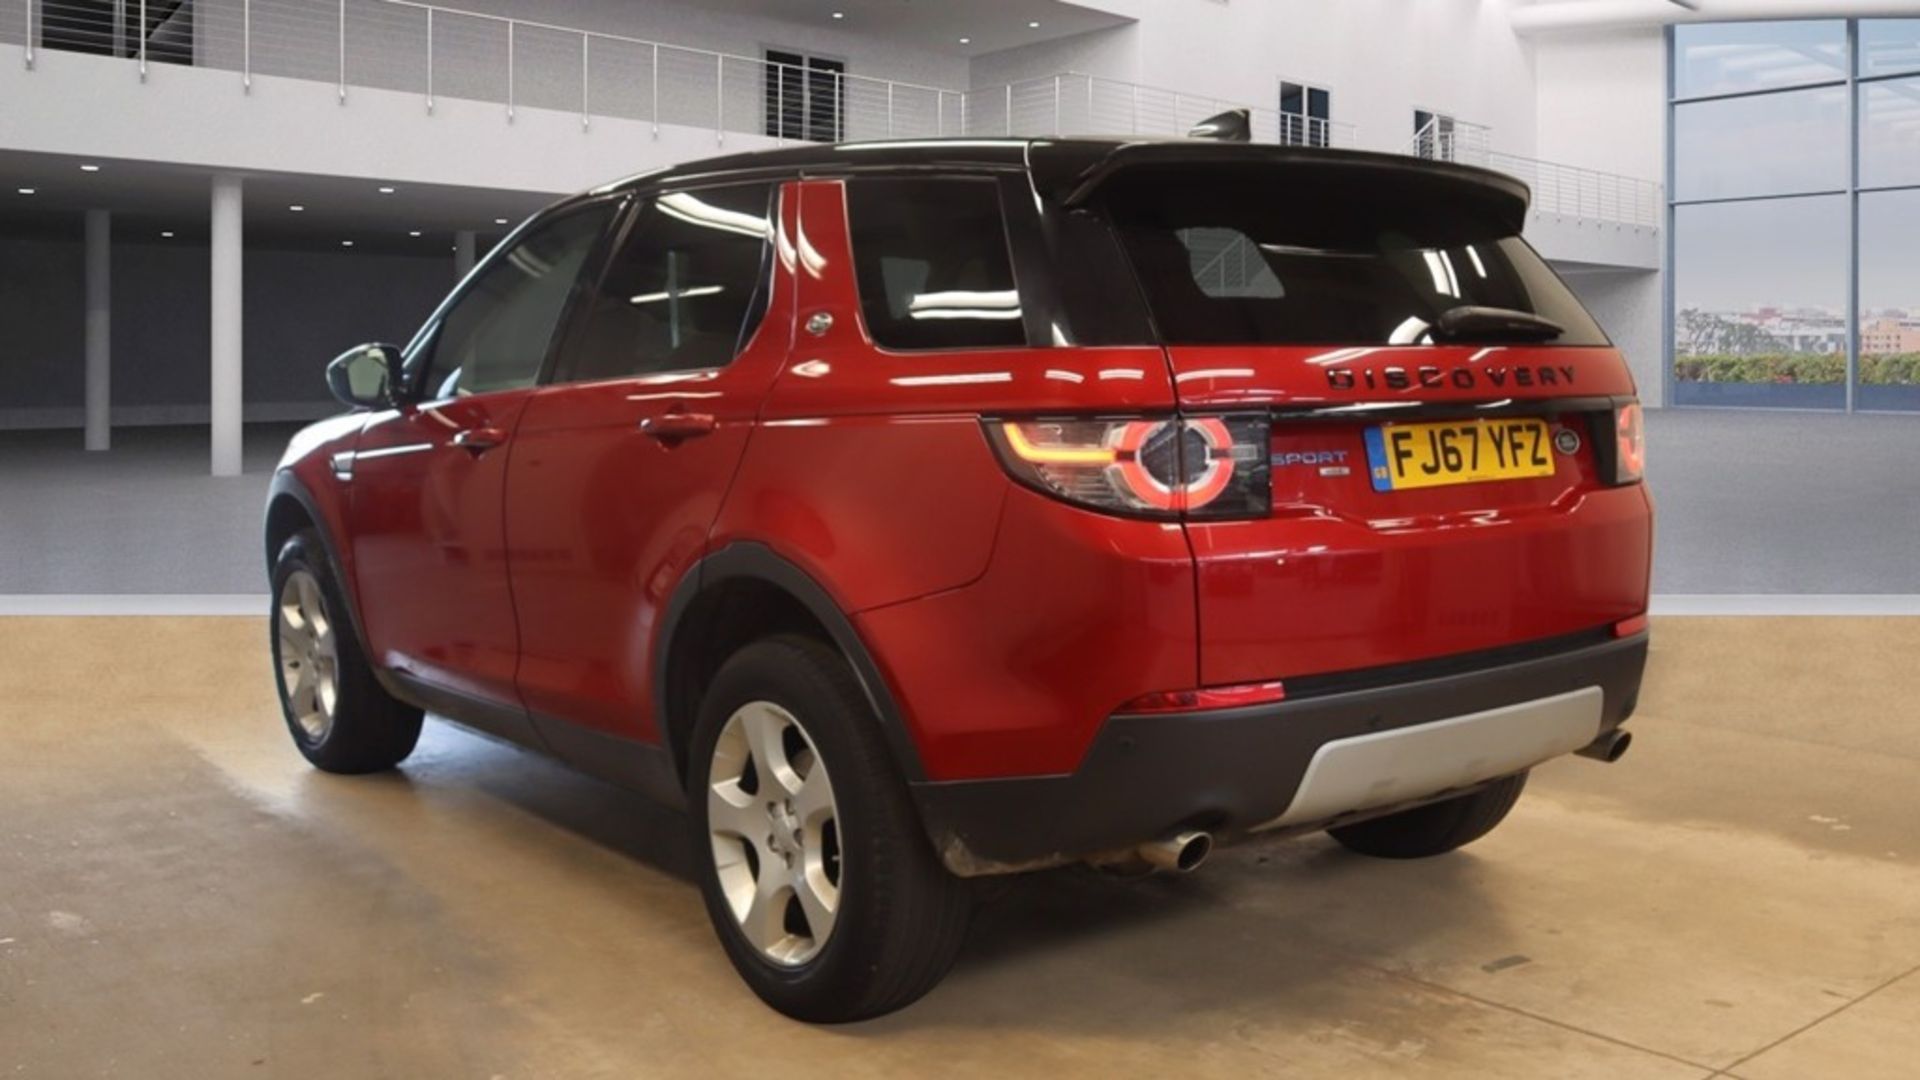 Land Rover Discovery Sport HSE 2.0 ED4 2017 '67 Reg' Sat Nav - Panoramic Glass Roof - ULEZ Compliant - Image 3 of 8